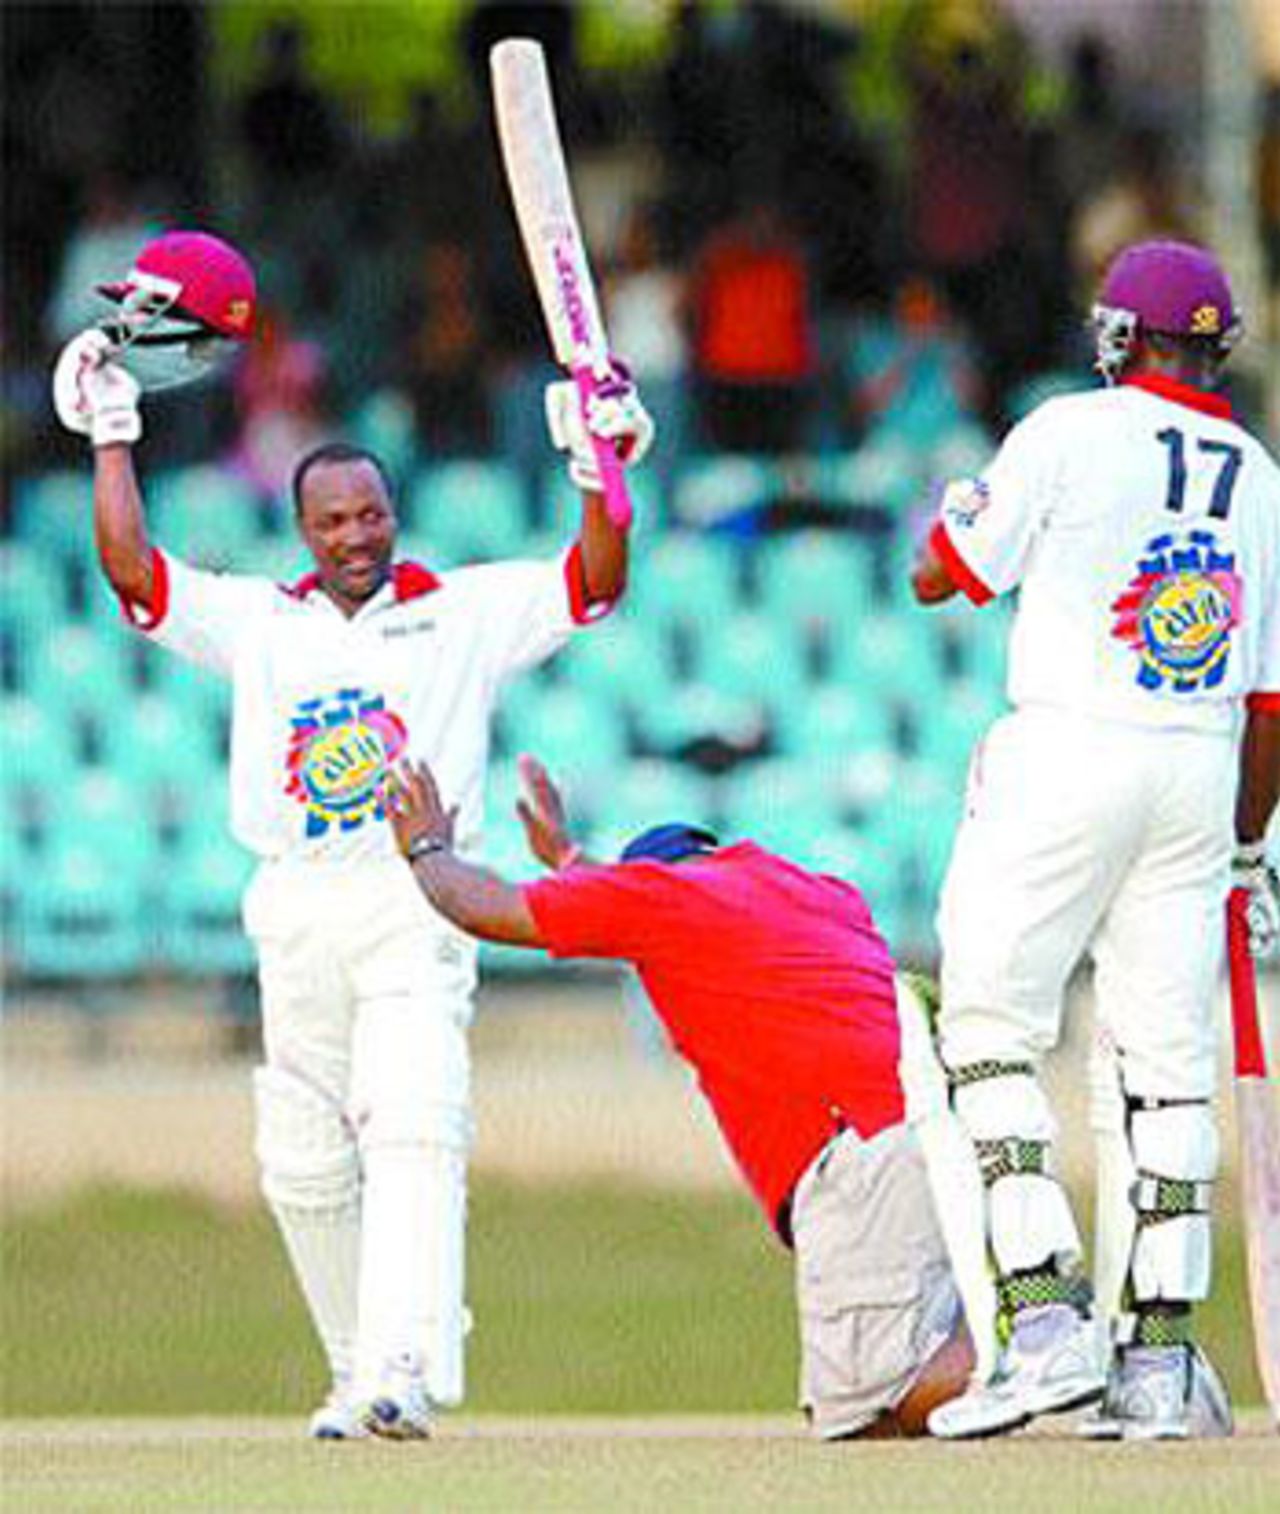 A fan pays homage to Brian Lara as he reaches his hundred, Trinidad & Tobago v  Guyana, Carib Beer Series, Port of Spain, January 5, 2007